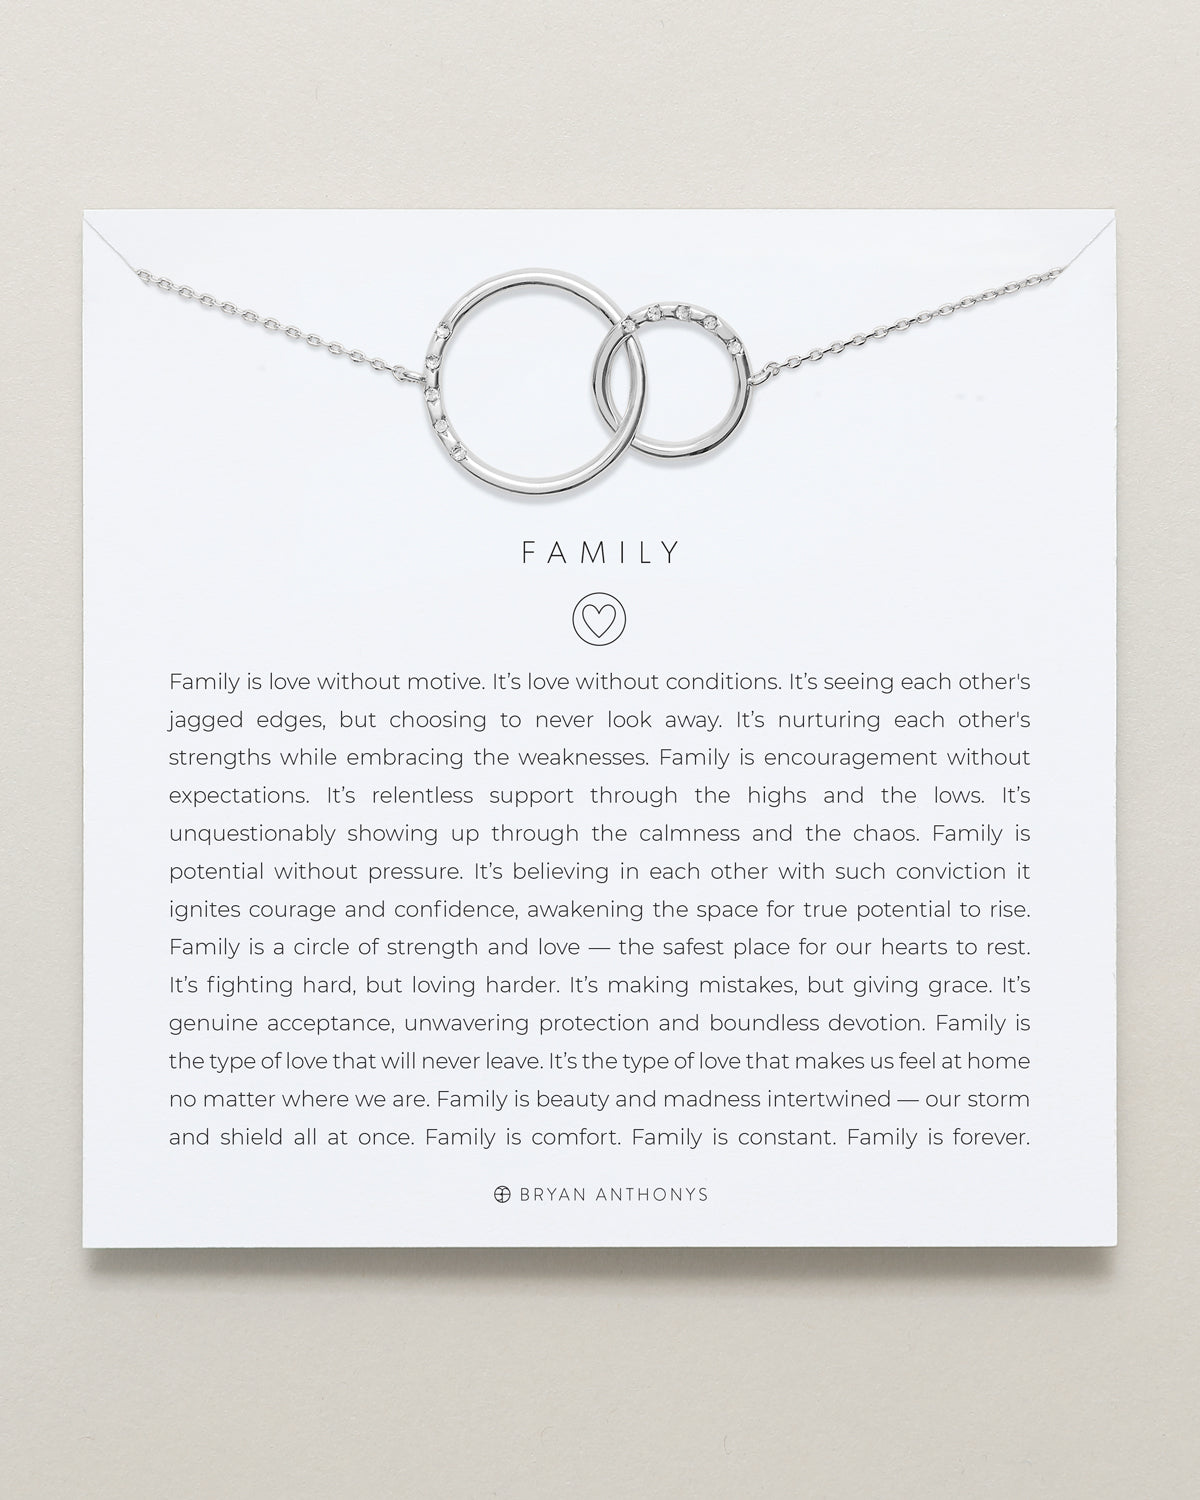 Bryan Anthonys Family Necklace Interlocking Circles in Silver on Card